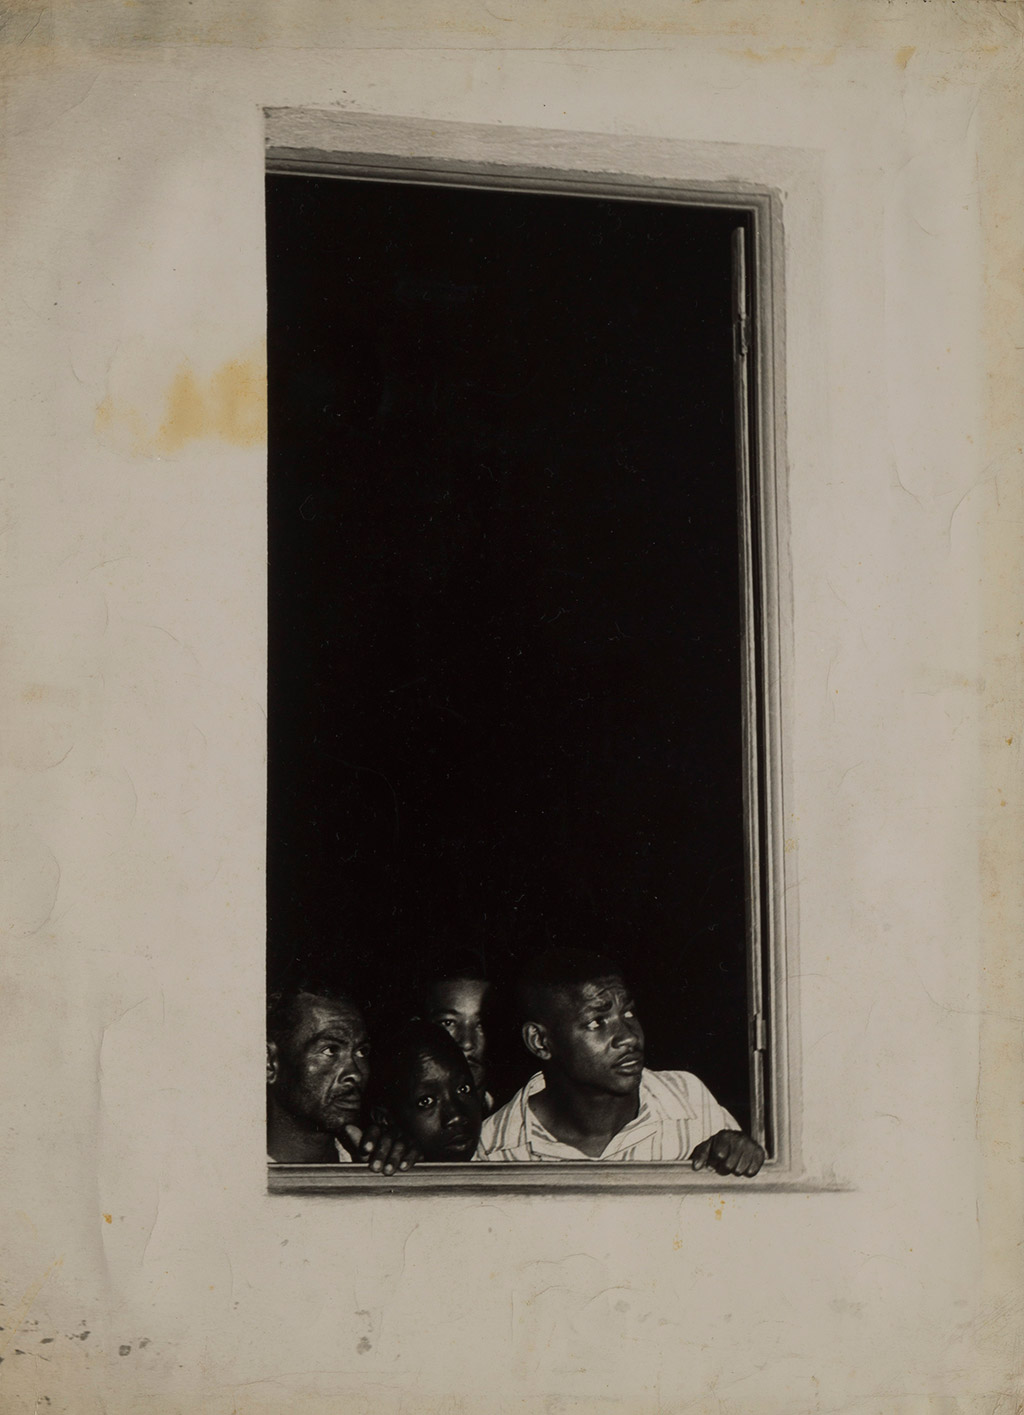 [Description: Black and white photograph of people looking out of a window] 